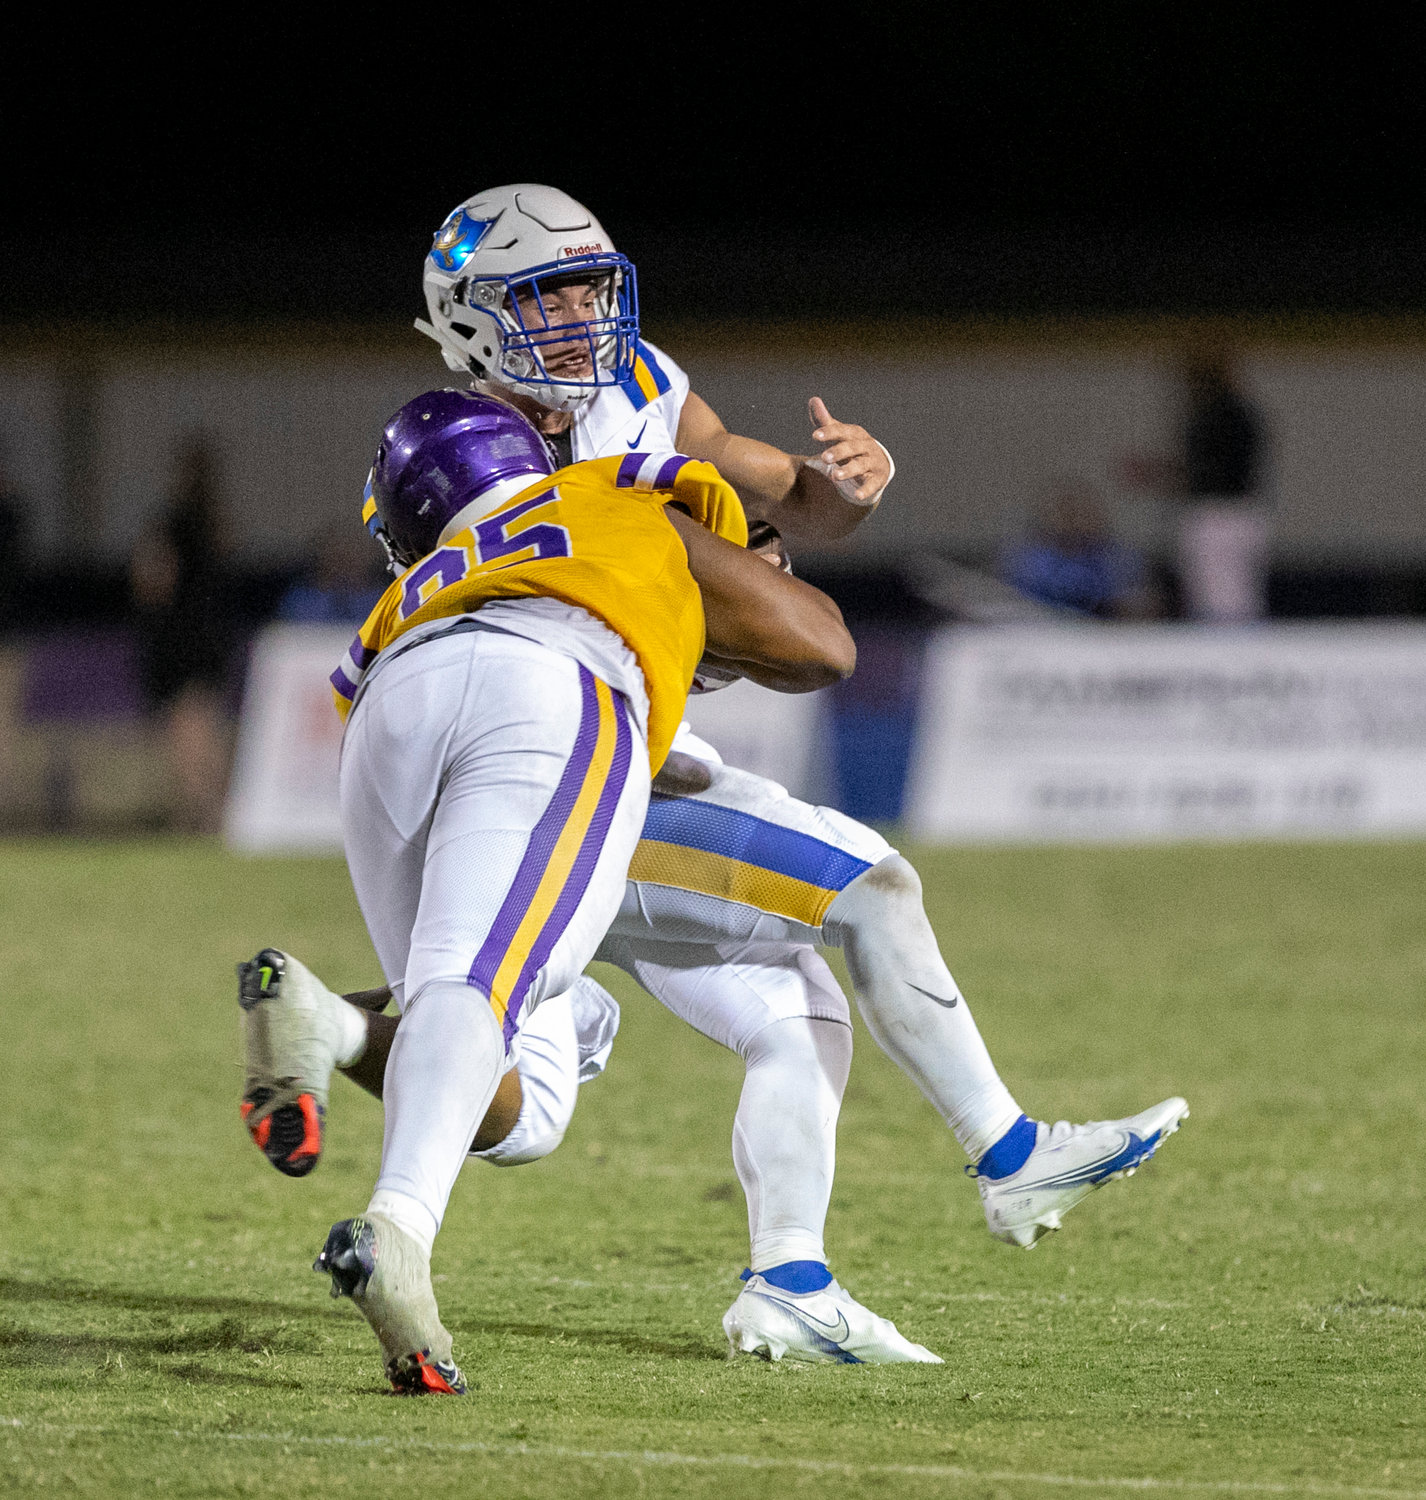 Daphne senior Johnnie Perdue corrals Fairhope quarterback Caden Creel for a sack in the first half of Friday’s rivalry game between the Trojans and Pirates at Jubilee Stadium Friday, Oct. 7.